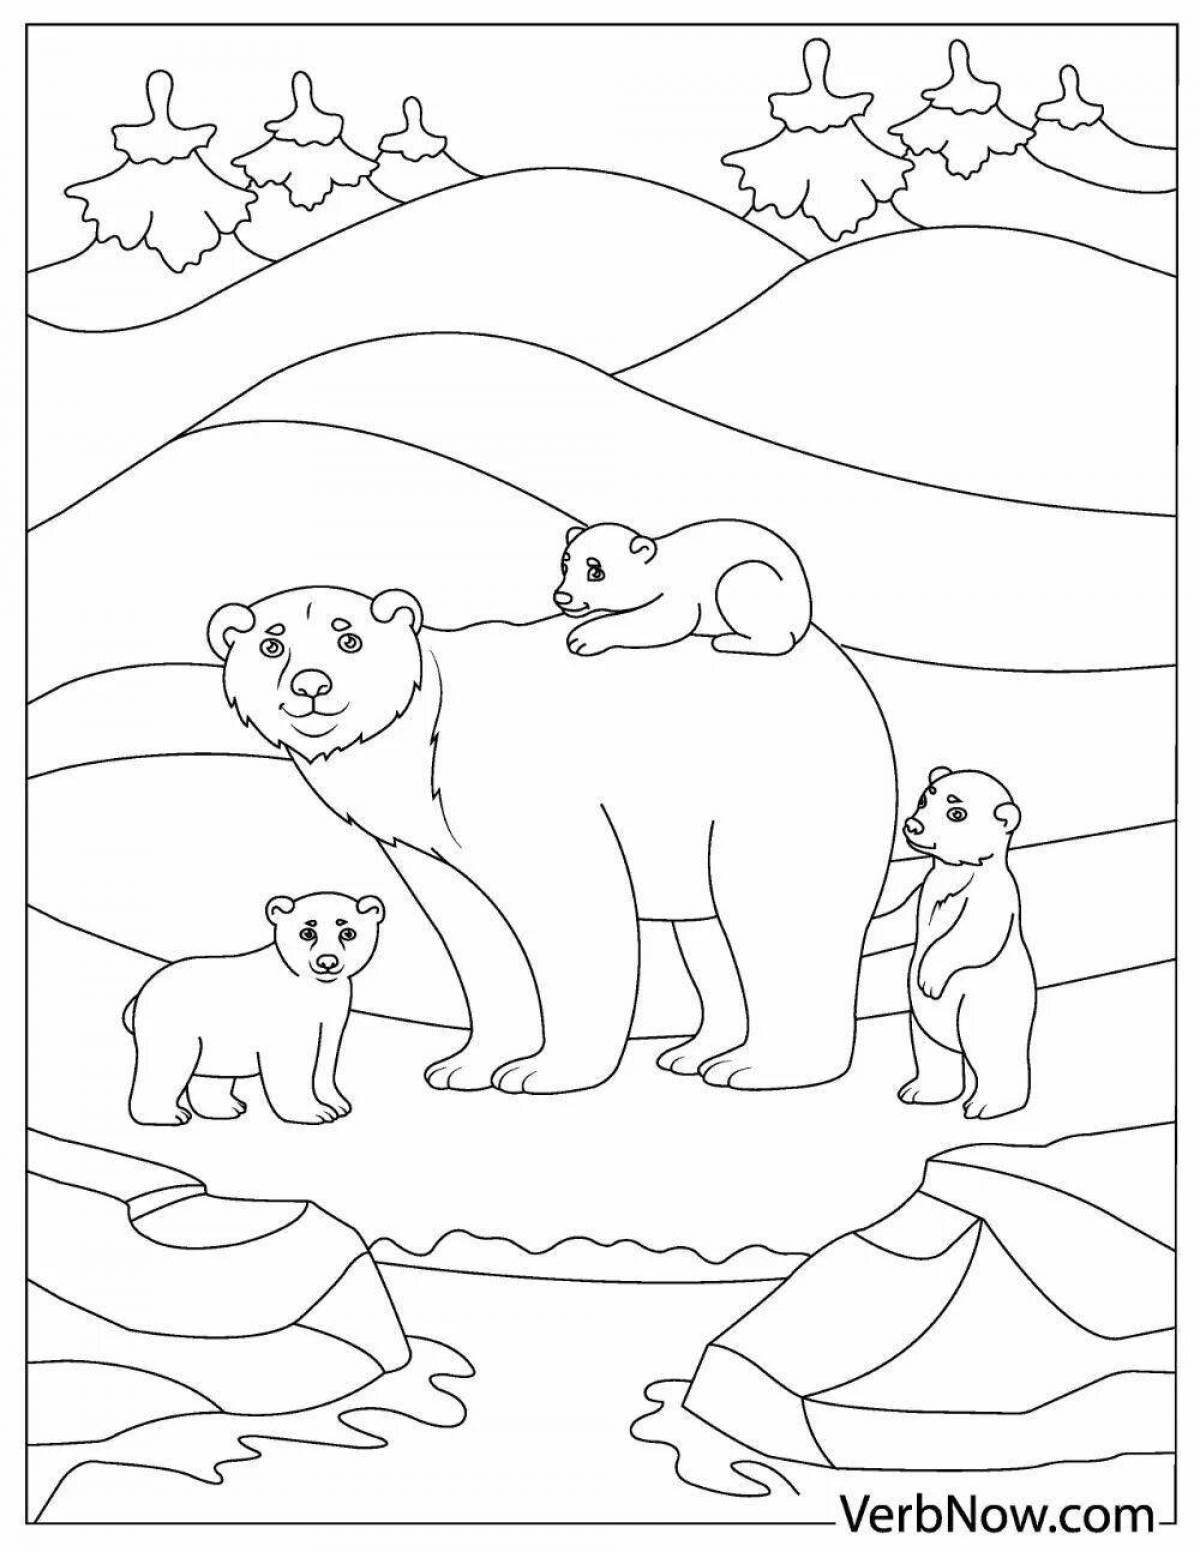 Majestic northern lights coloring page